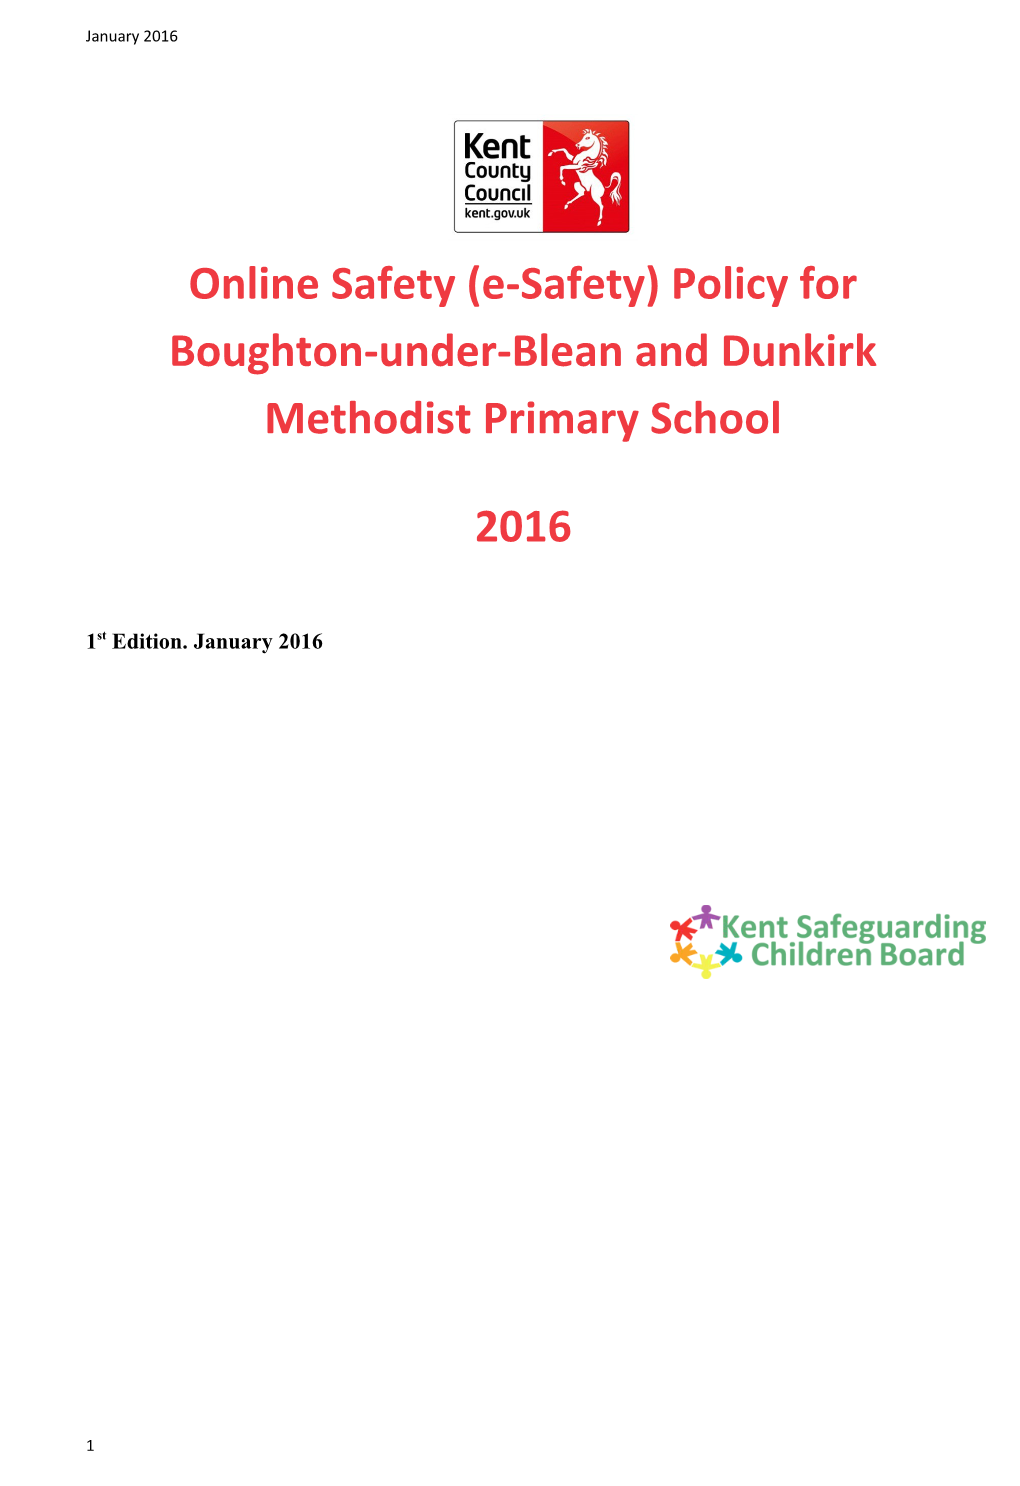 Online Safety (E-Safety) Policy for Boughton-Under-Blean and Dunkirk Methodist Primary School